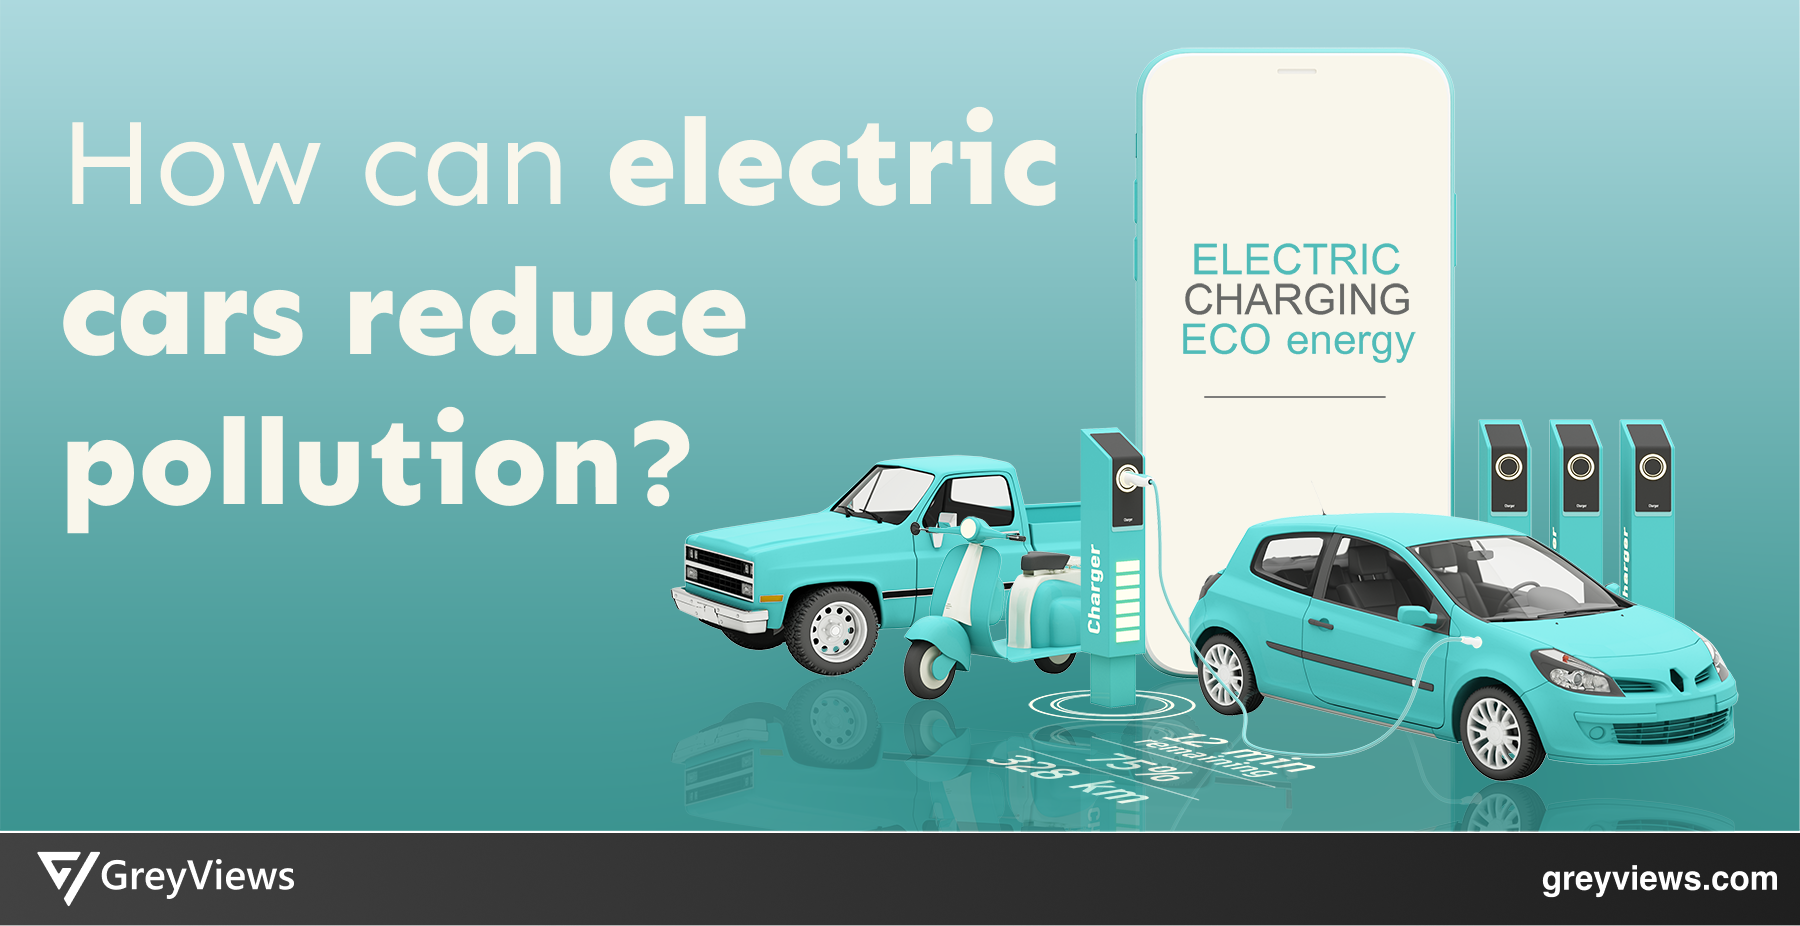 How can electric cars reduce pollution?